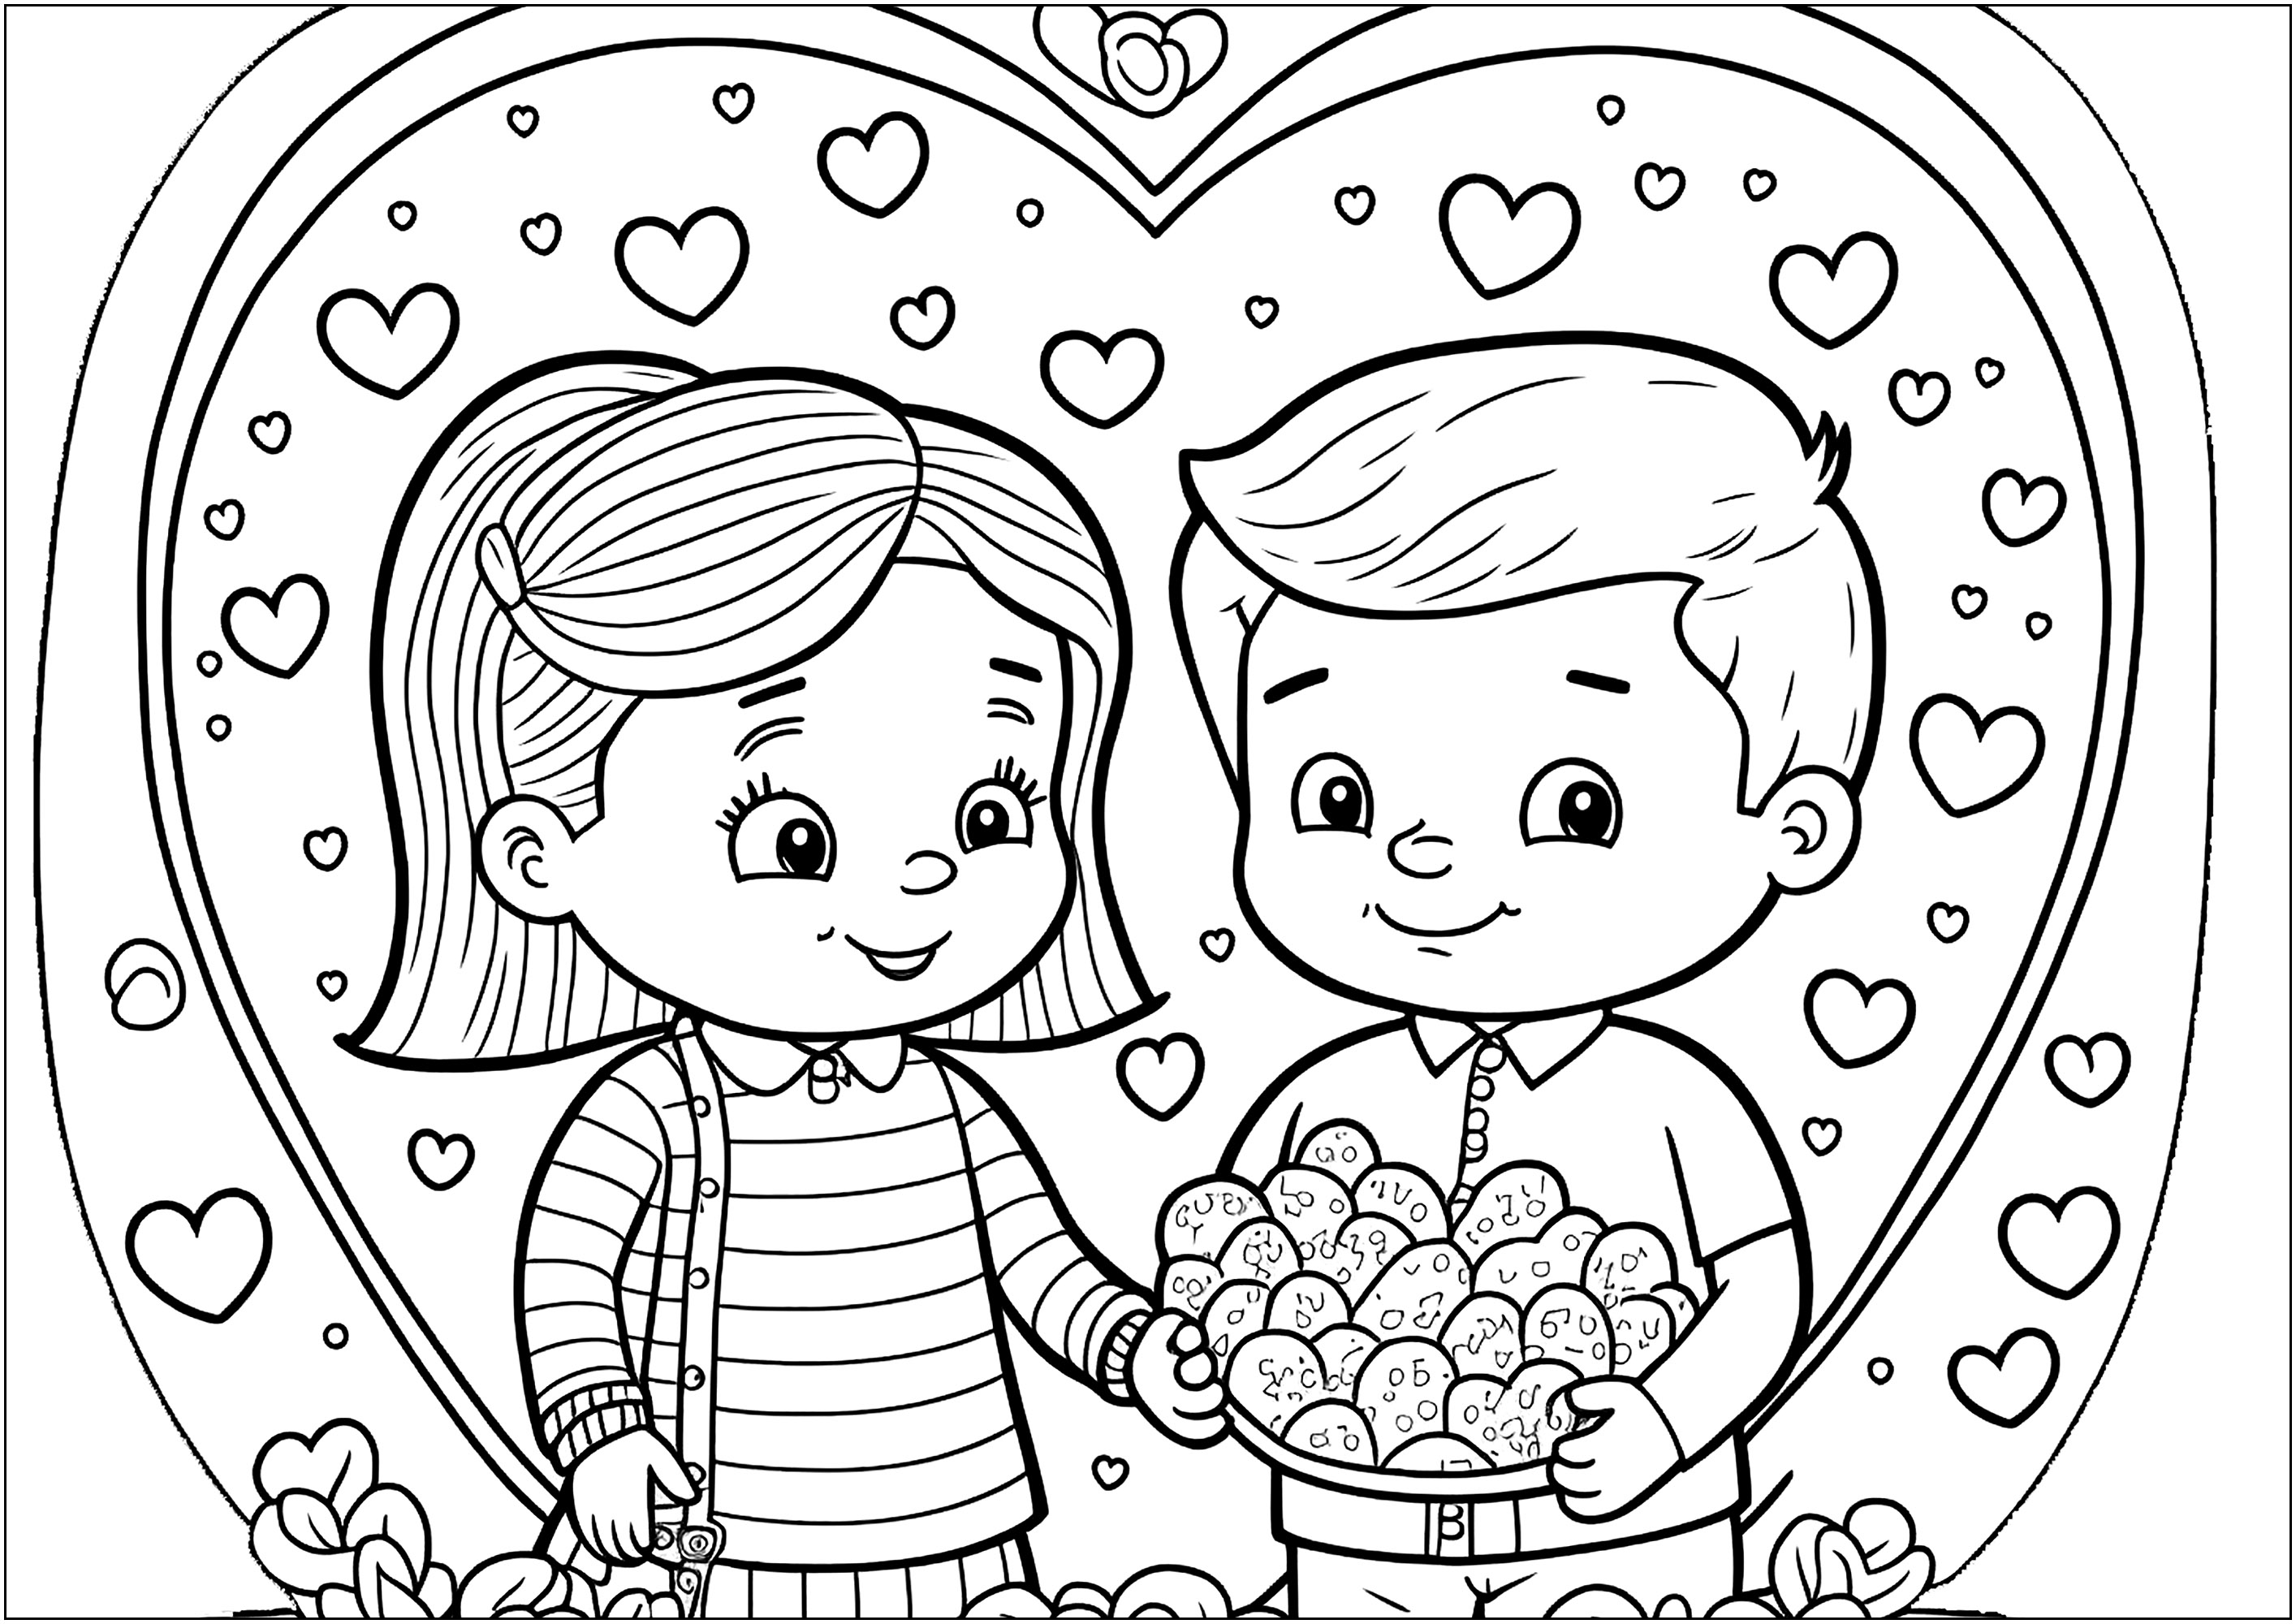 Valentine's Day - Valentines Day Kids Coloring Pages